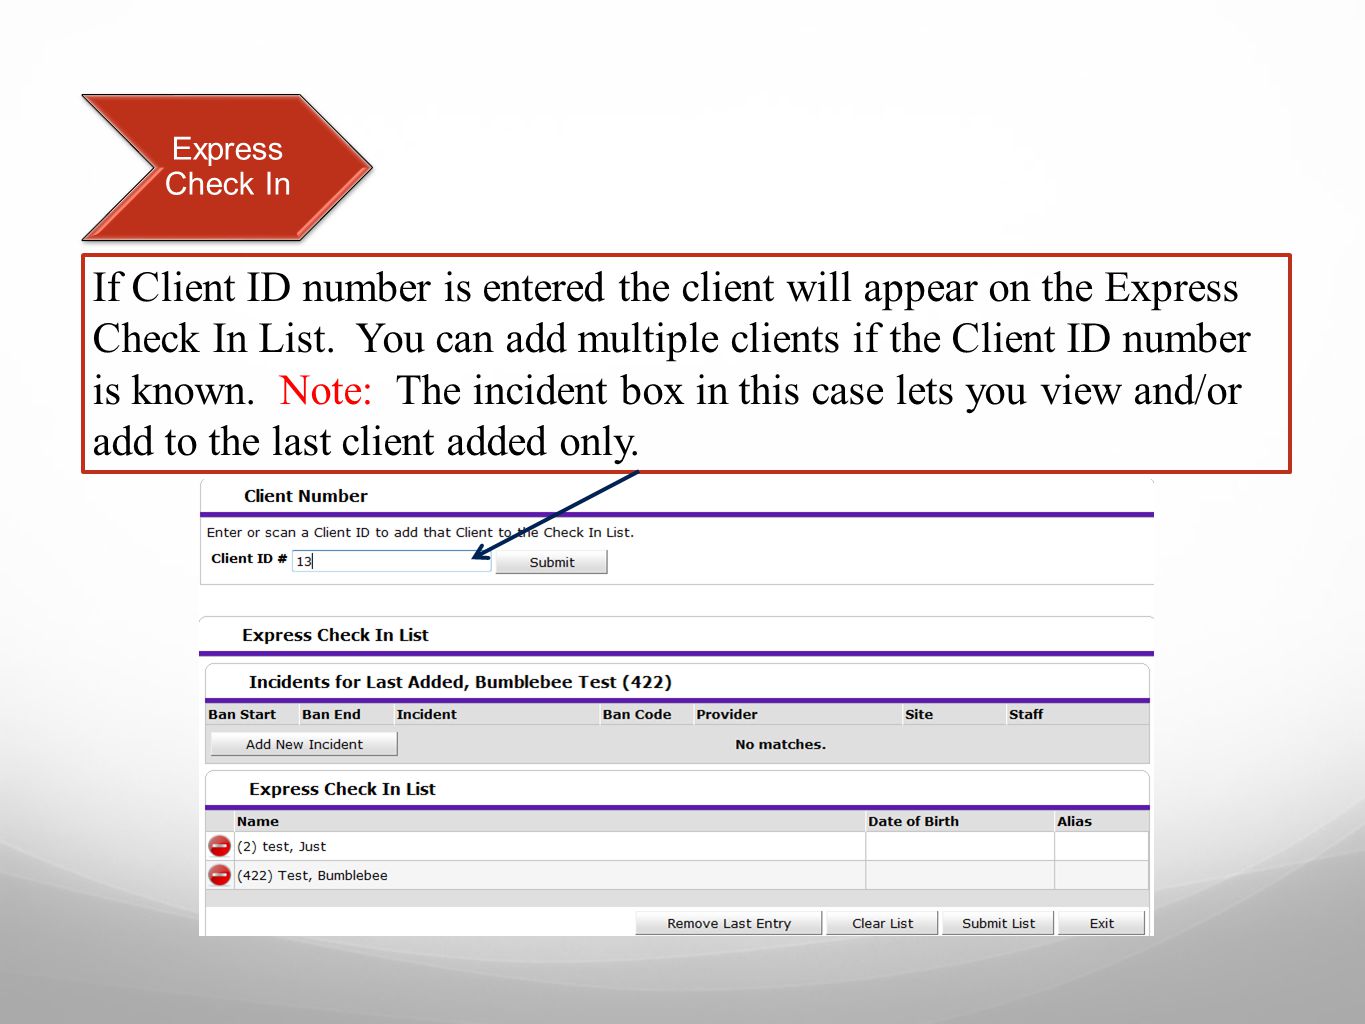 Express Check In If Client ID number is entered the client will appear on the Express Check In List.